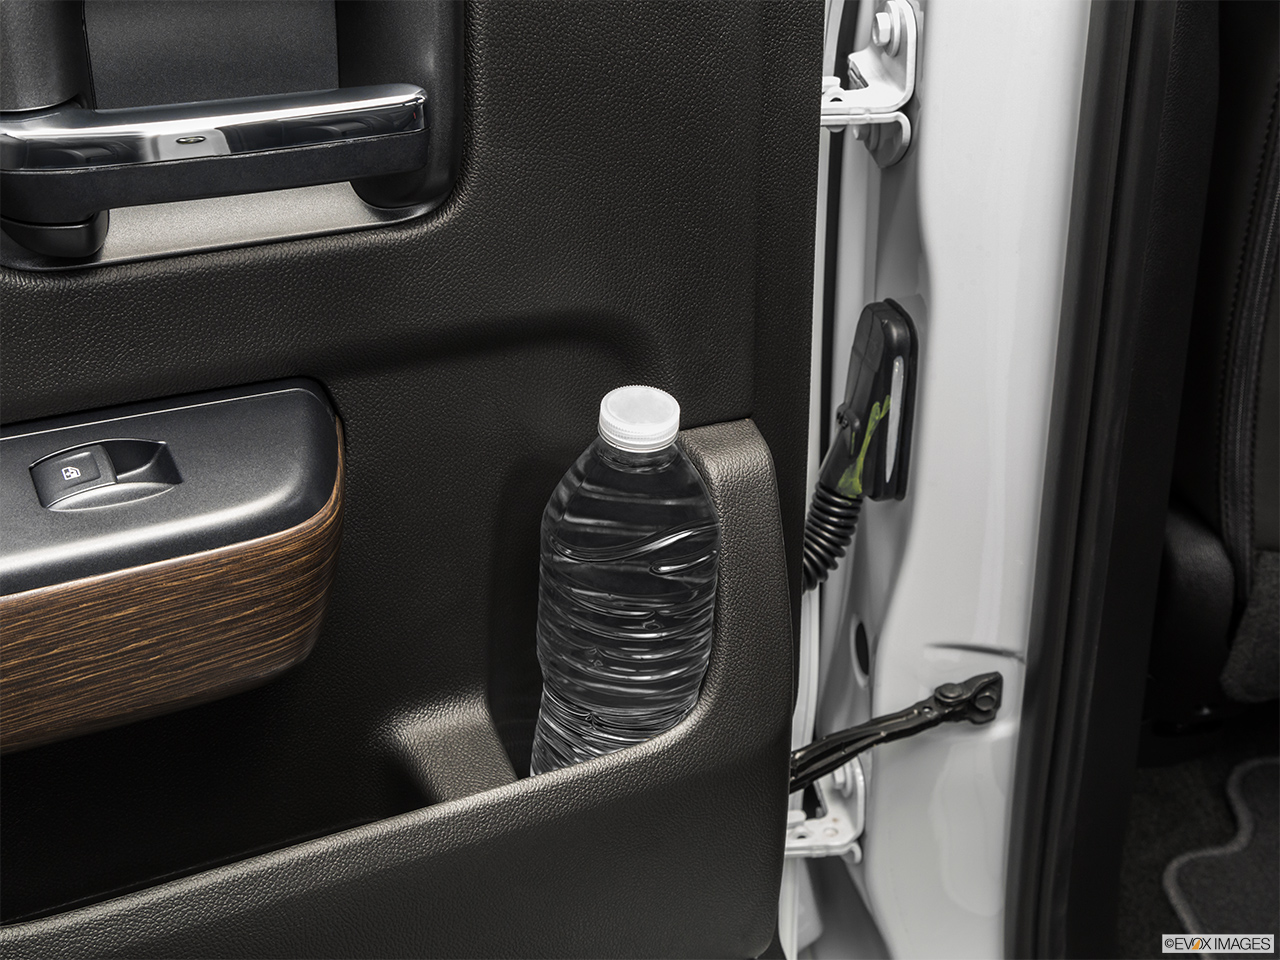 2019 GMC Sierra 2500HD Denali Second row side cup holder with coffee prop, or second row door cup holder with water bottle. 